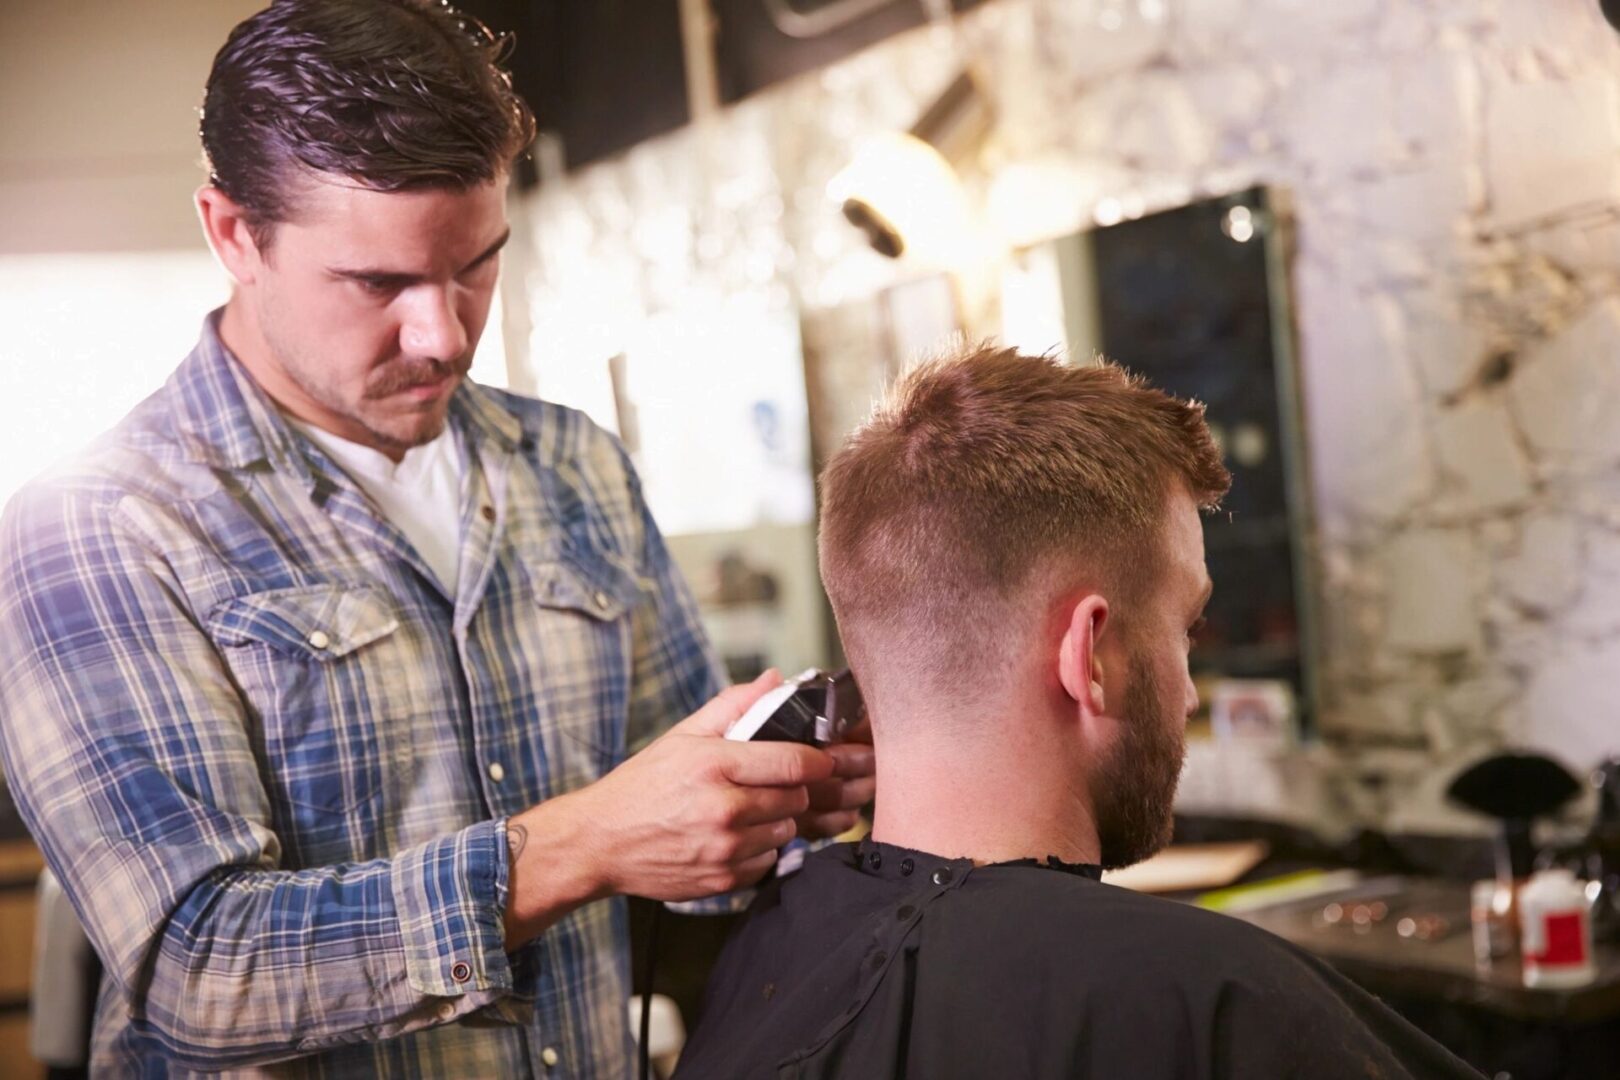 A man getting his hair cut by another man.